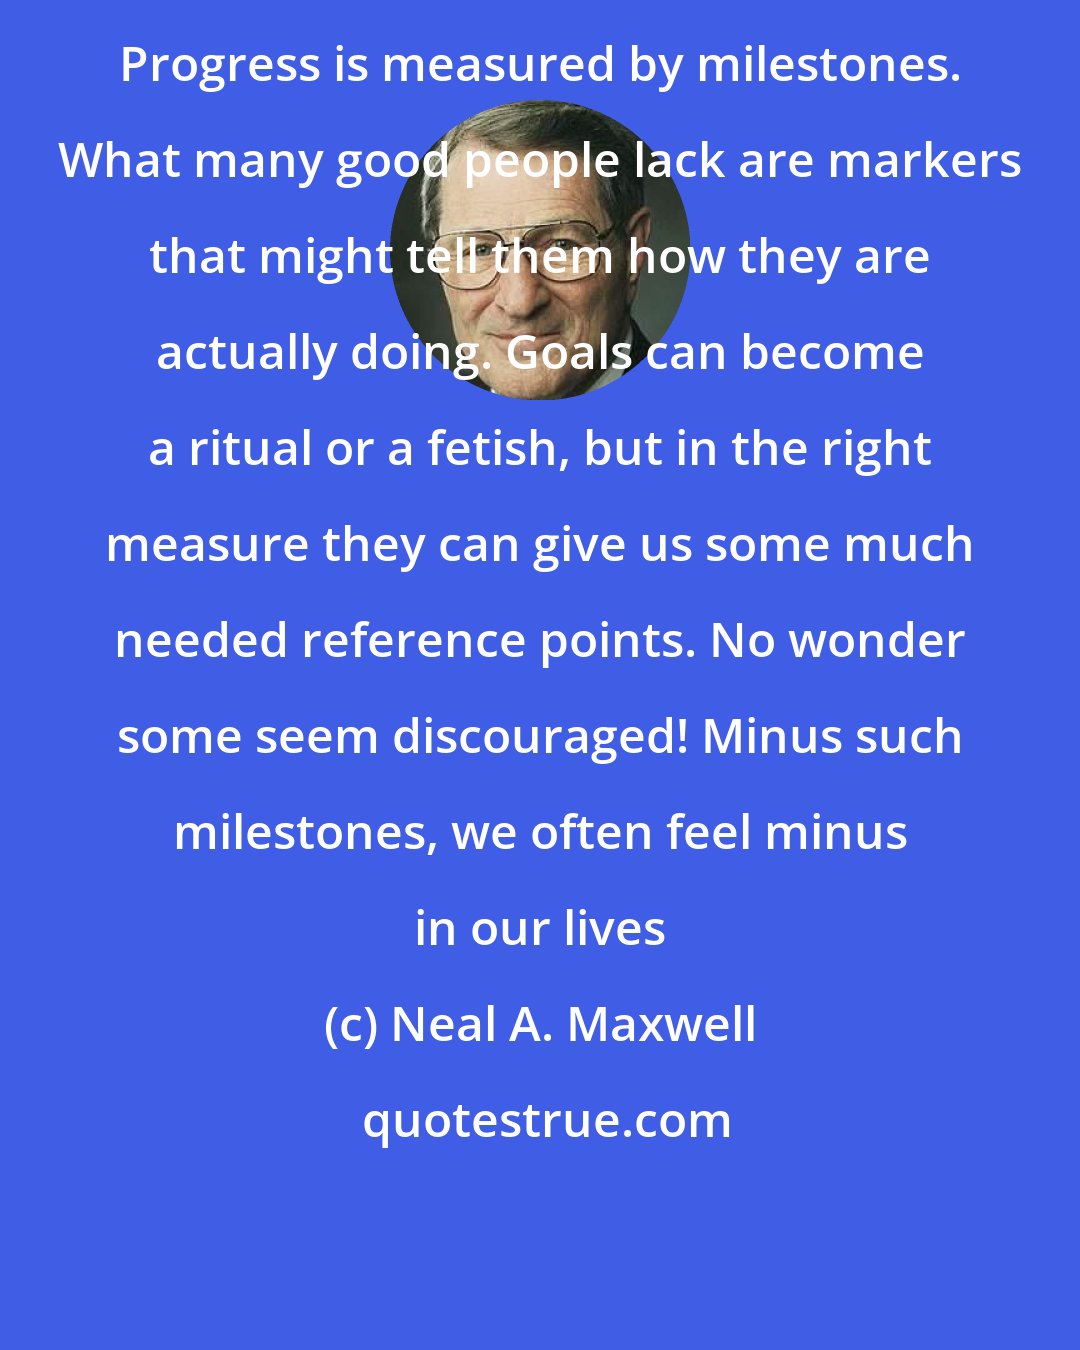 Neal A. Maxwell: Progress is measured by milestones. What many good people lack are markers that might tell them how they are actually doing. Goals can become a ritual or a fetish, but in the right measure they can give us some much needed reference points. No wonder some seem discouraged! Minus such milestones, we often feel minus in our lives